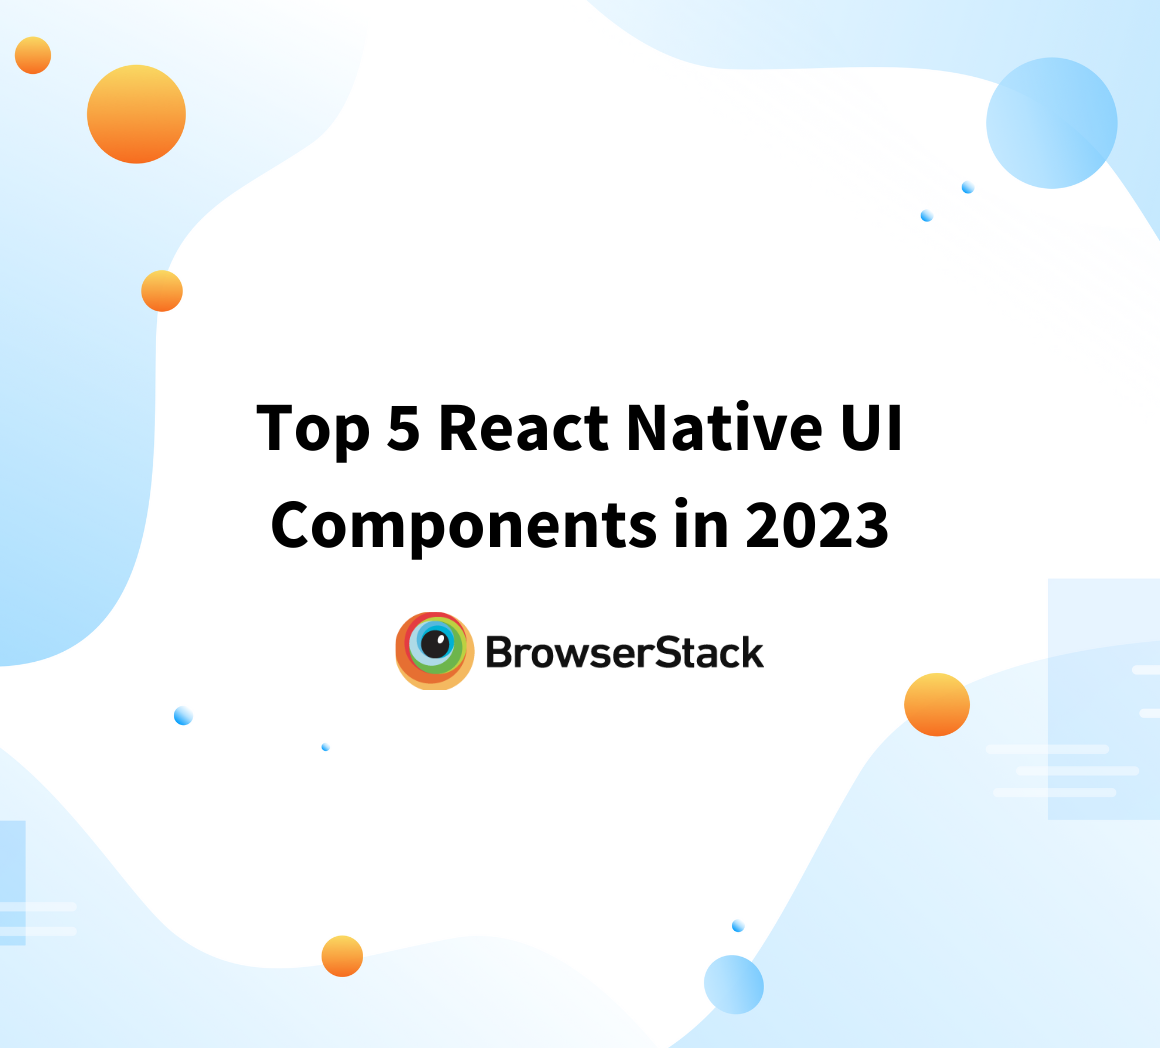 Top 5 React Native UI Components in 2023